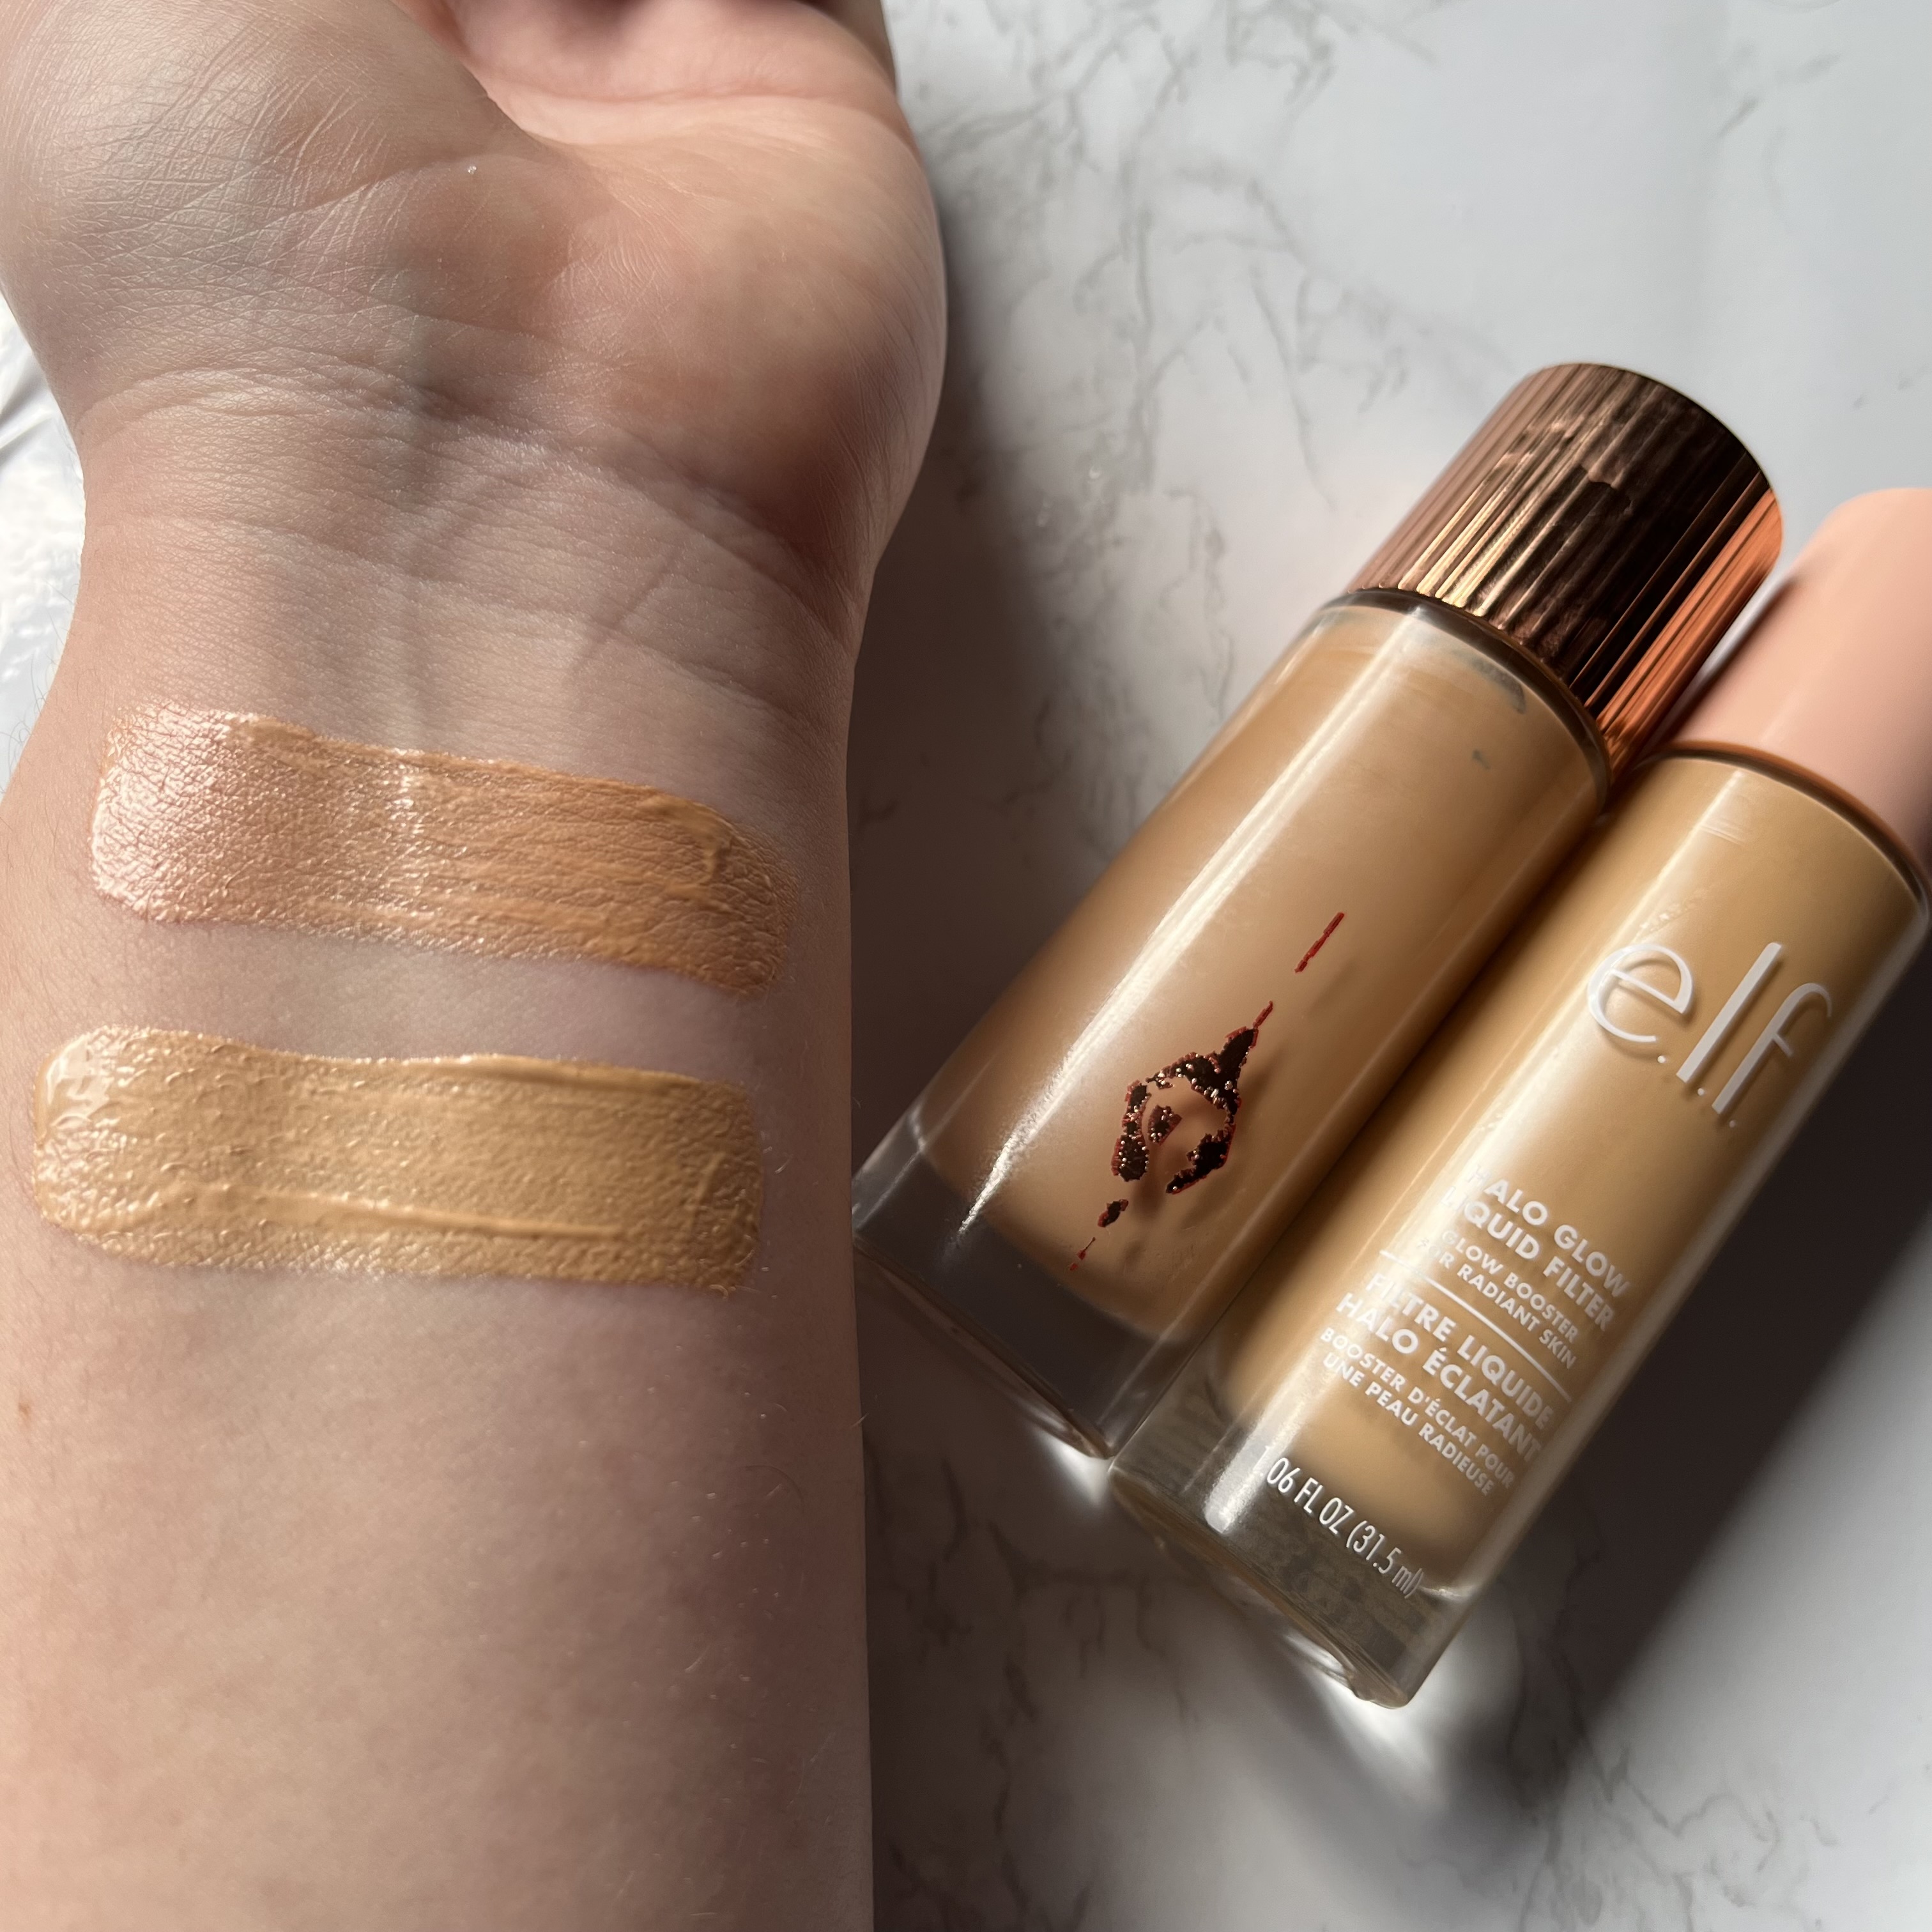 Is e.l.f. Cosmetics Halo Glow Liquid Filter really a dupe for Charlotte  Tilbury Hollywood Flawless Filter? A side-by-side comparison - A Woman's  Confidence